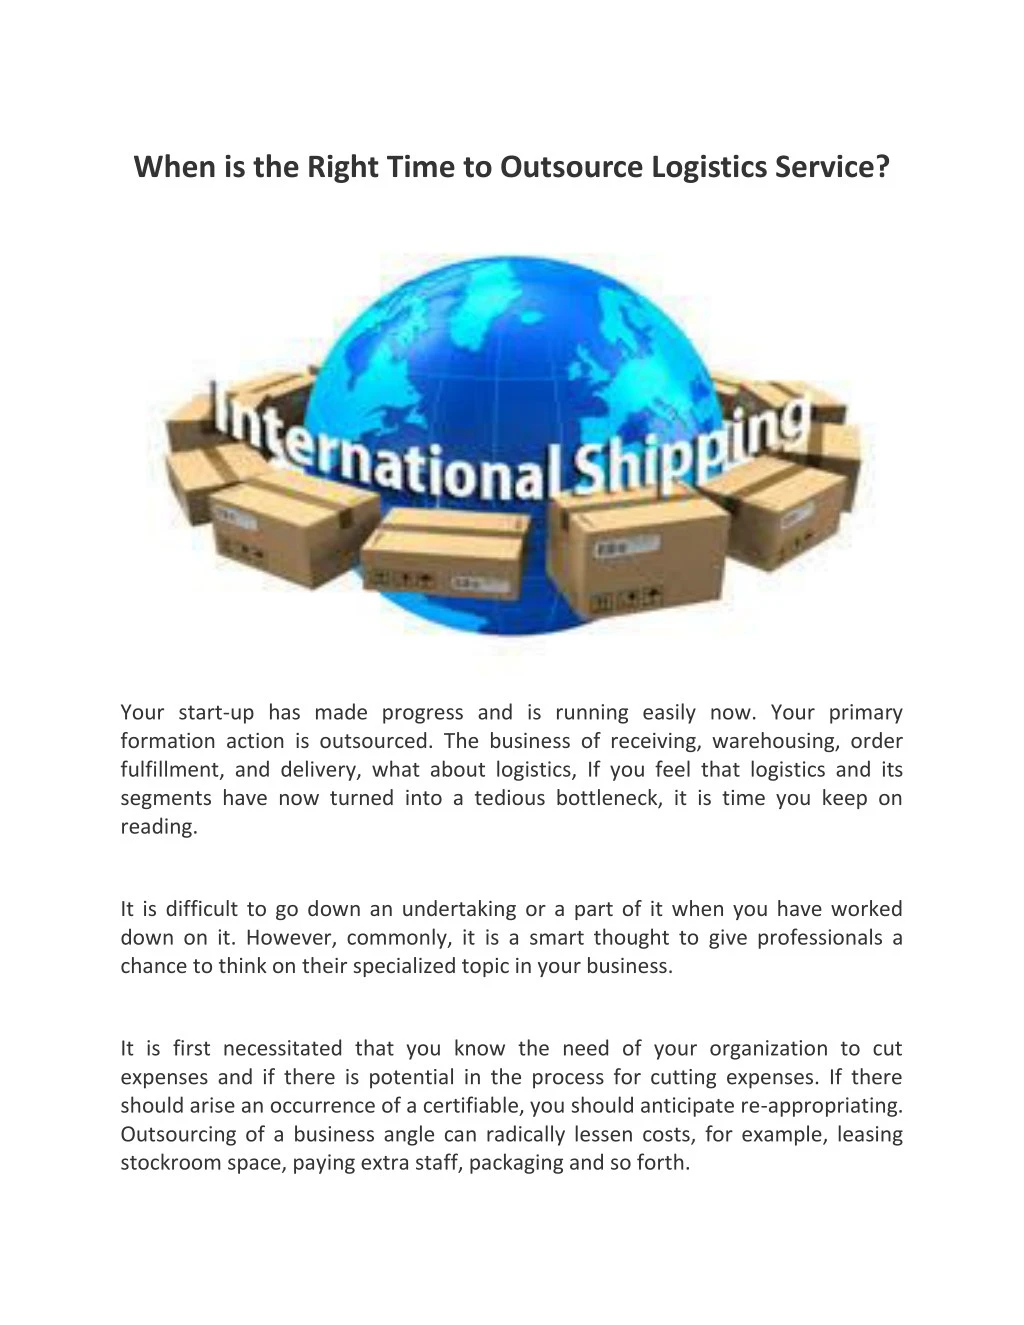 when is the right time to outsource logistics